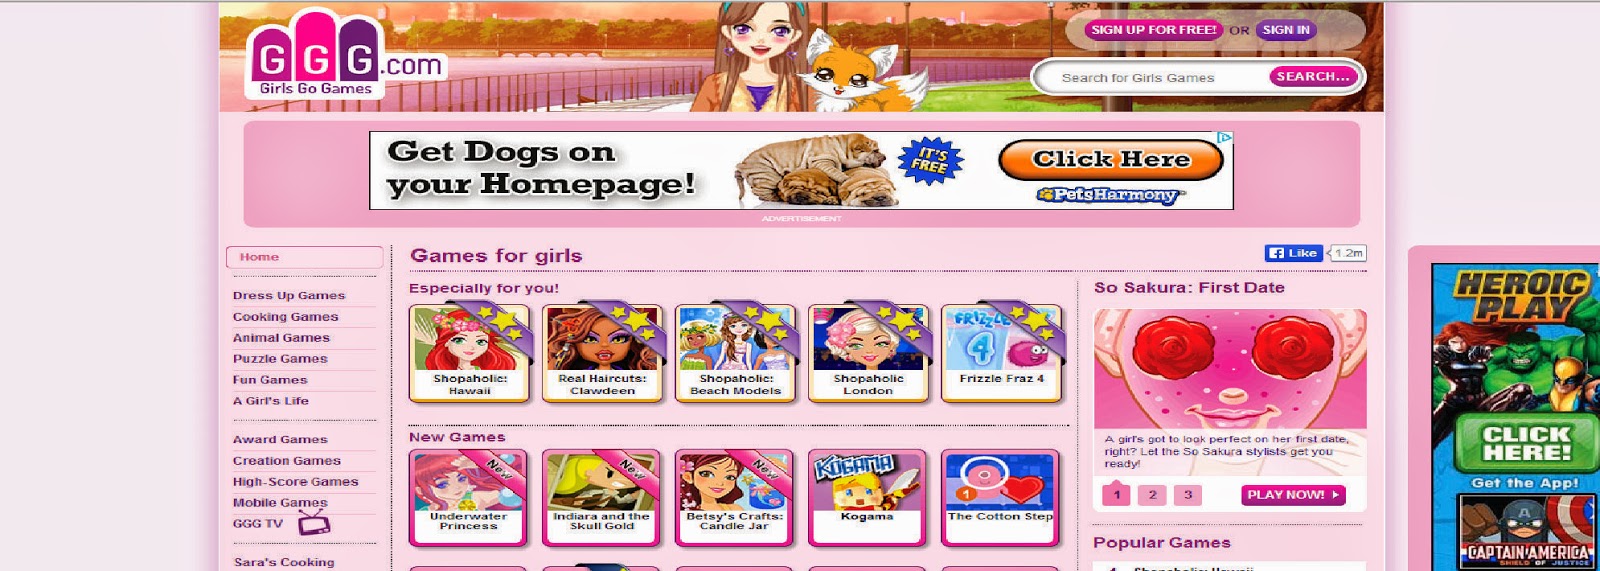 What are some dress-up games that Girls Go Games offers?